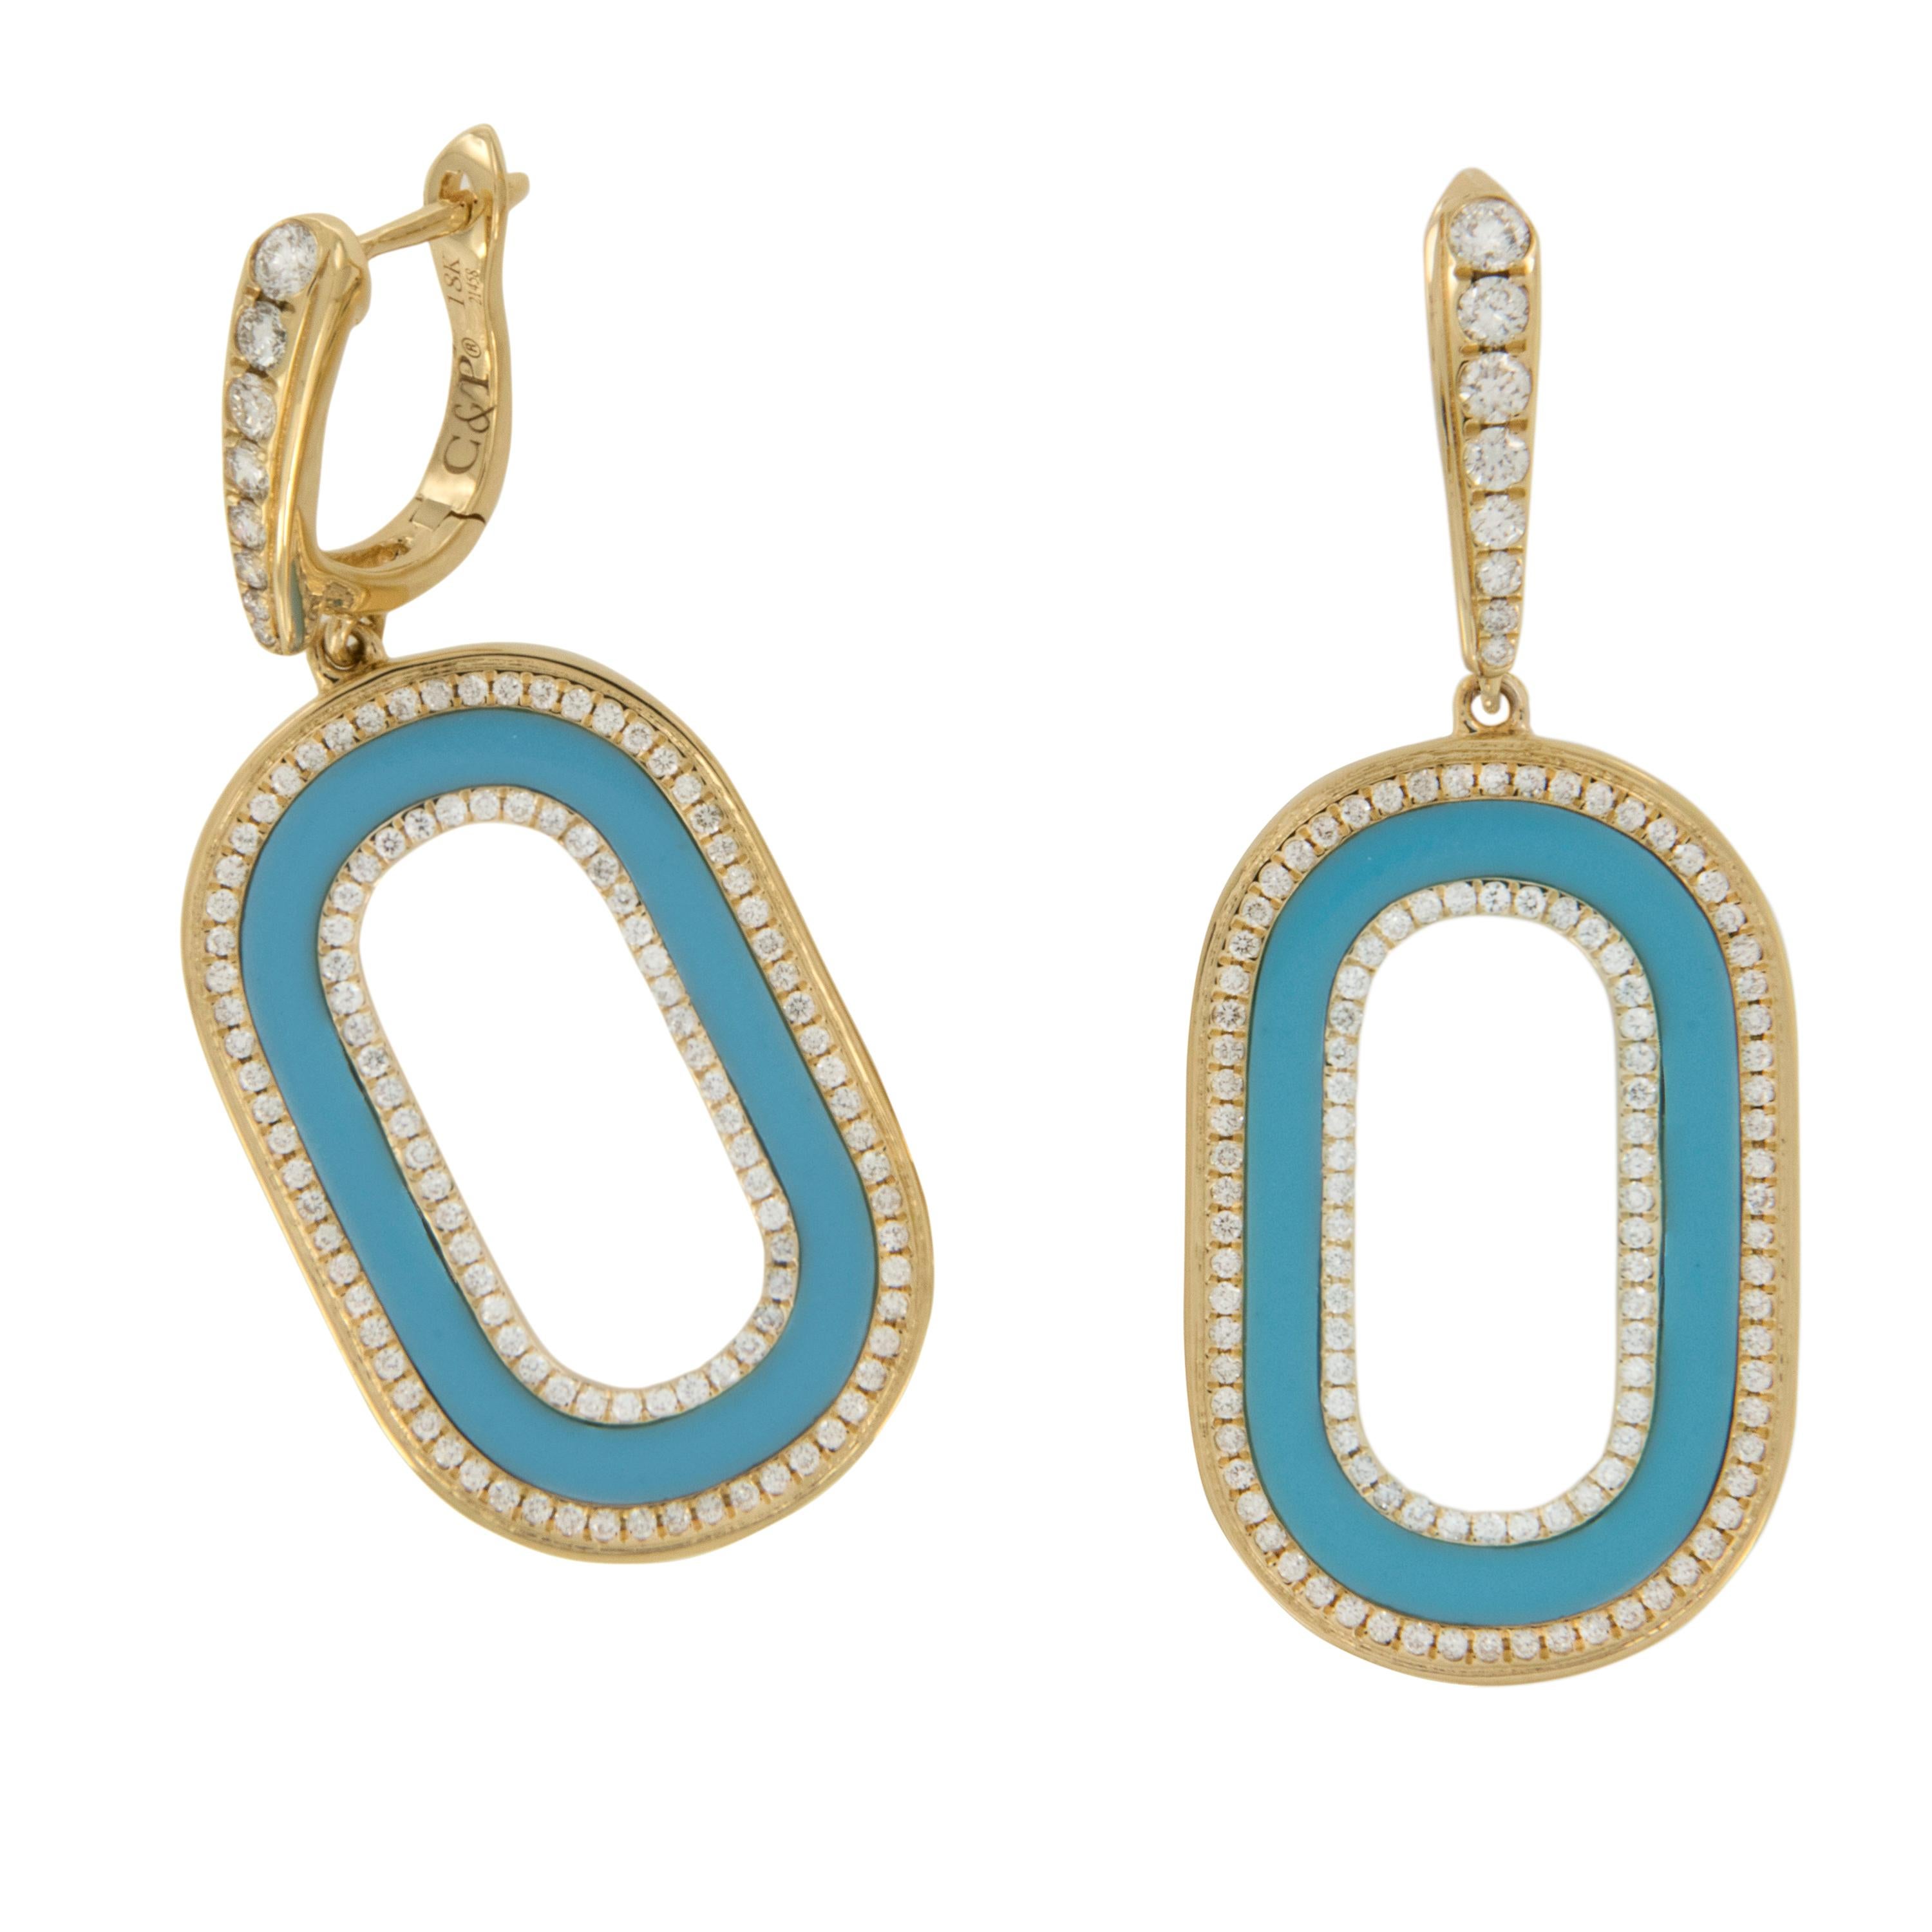 Contemporary 18 Karat Yellow Gold Inlaid Turquoise and 0.97 Cttw. Diamond Dangle Earrings